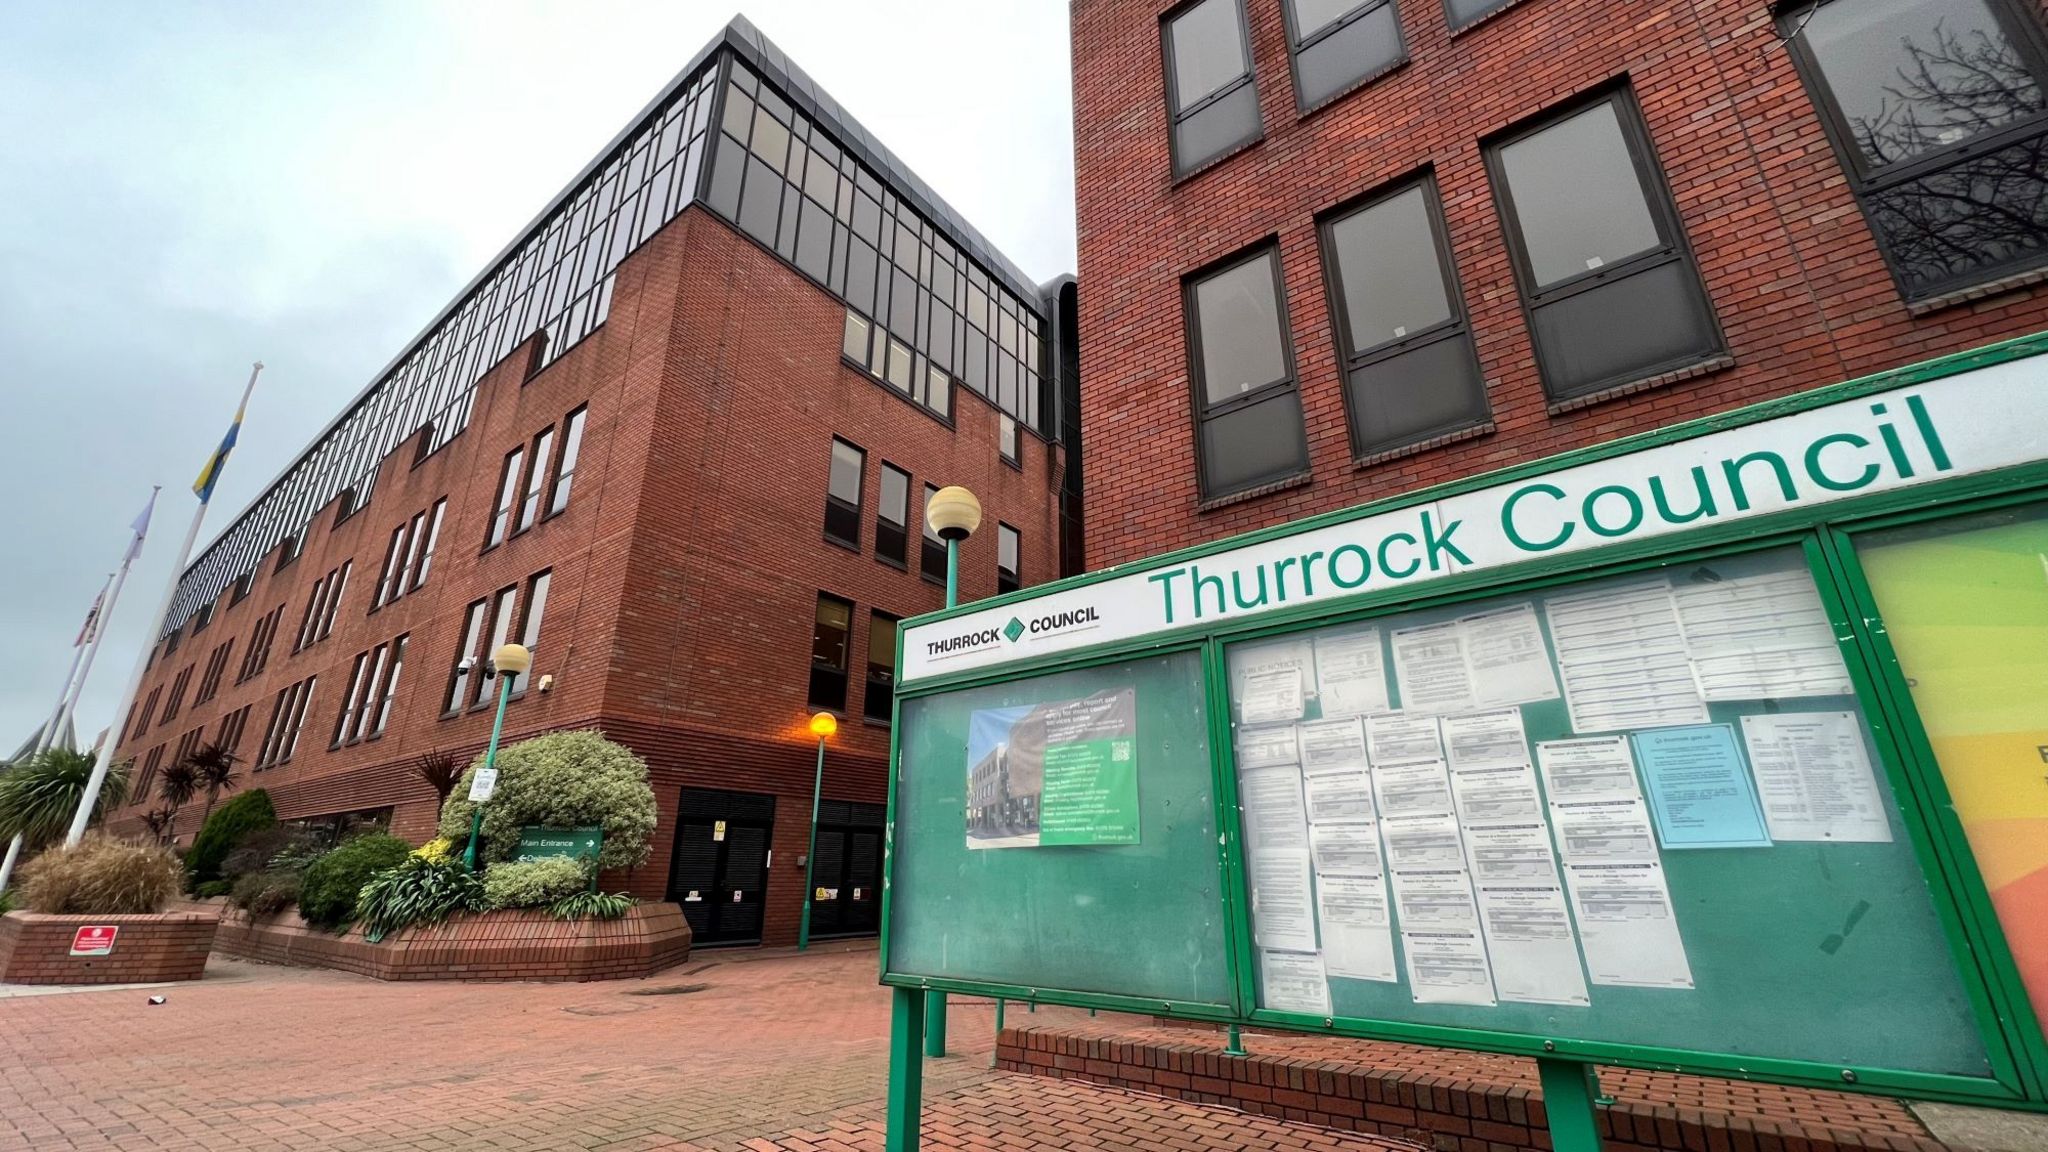 Thurrock Council offices